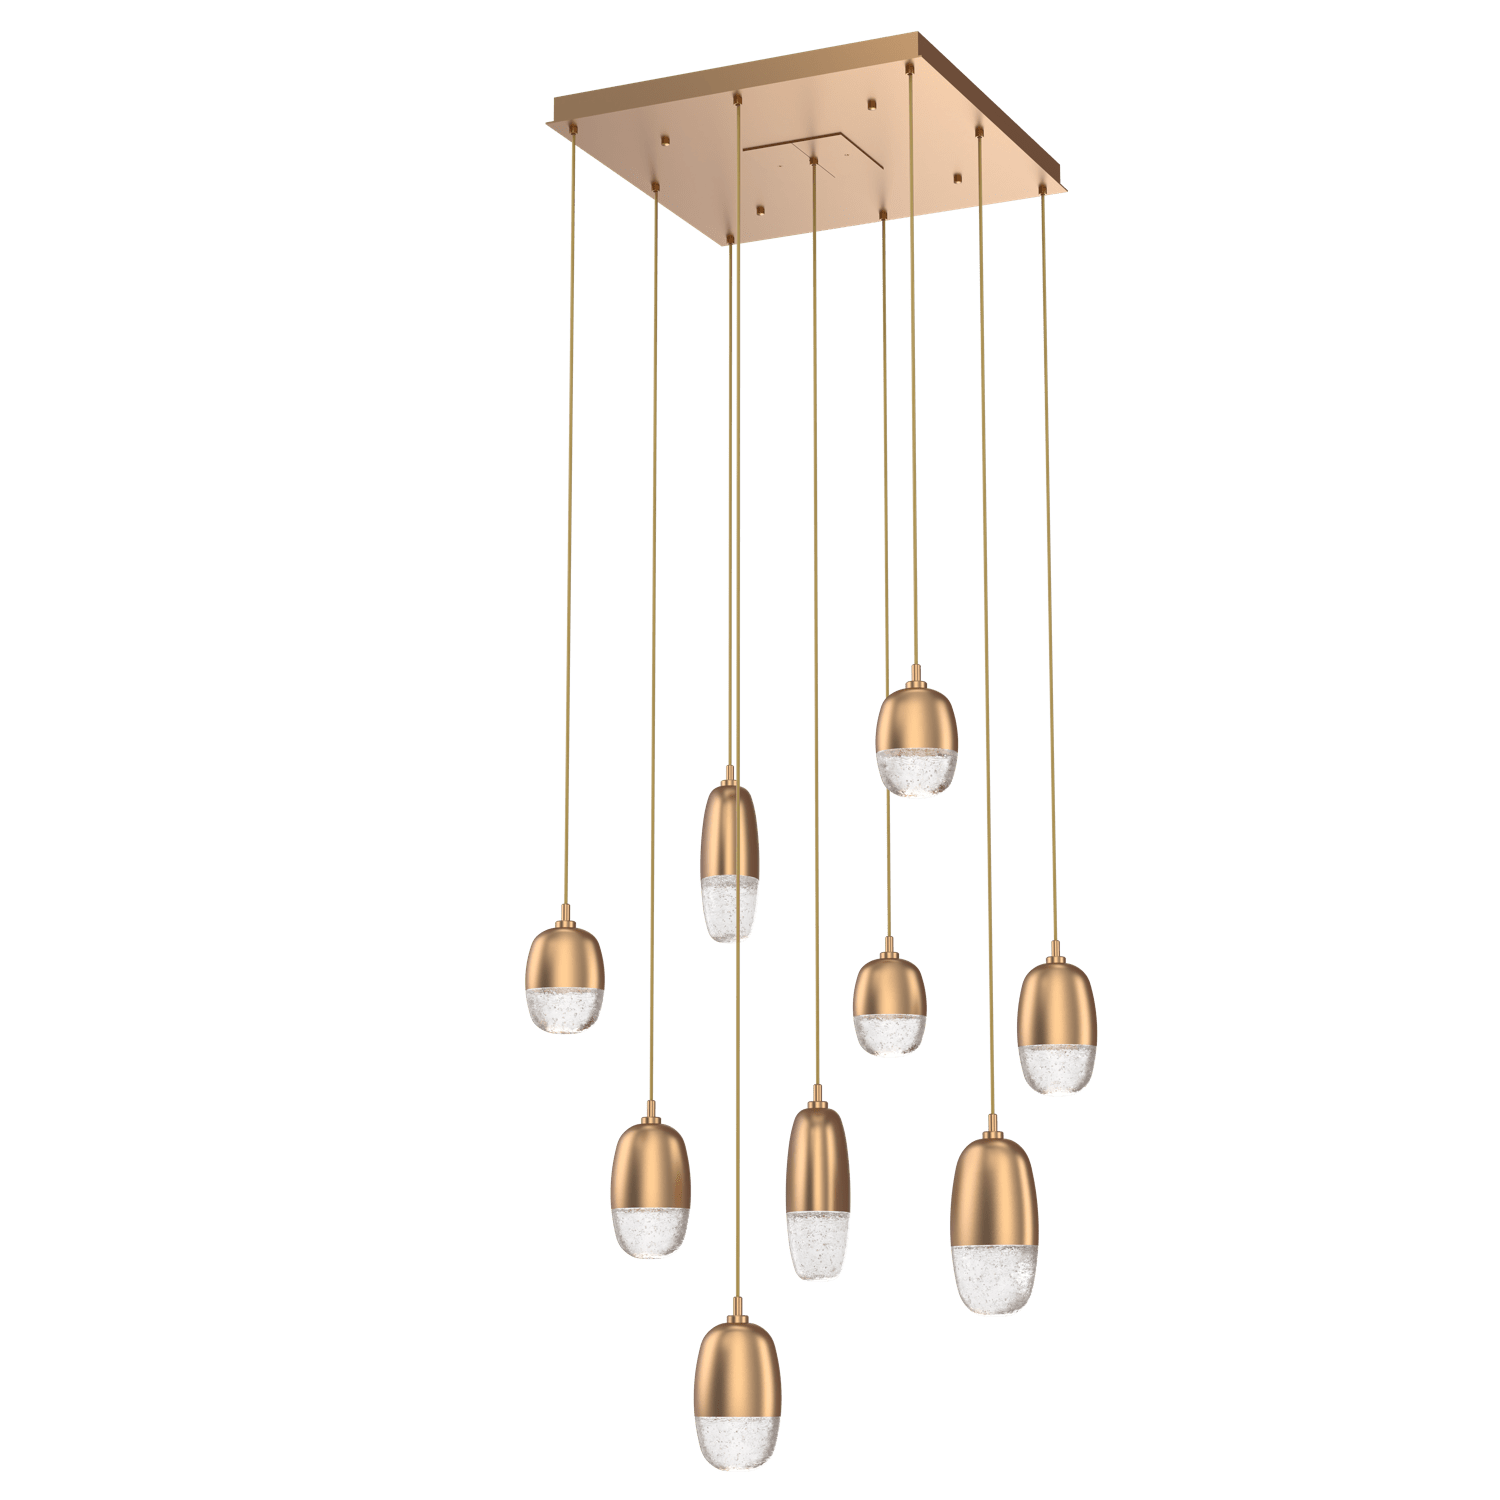 CHB0079-09-NB-Hammerton-Studio-Pebble-9-light-square-pendant-chandelier-with-novel-brass-finish-and-clear-cast-glass-shades-and-LED-lamping